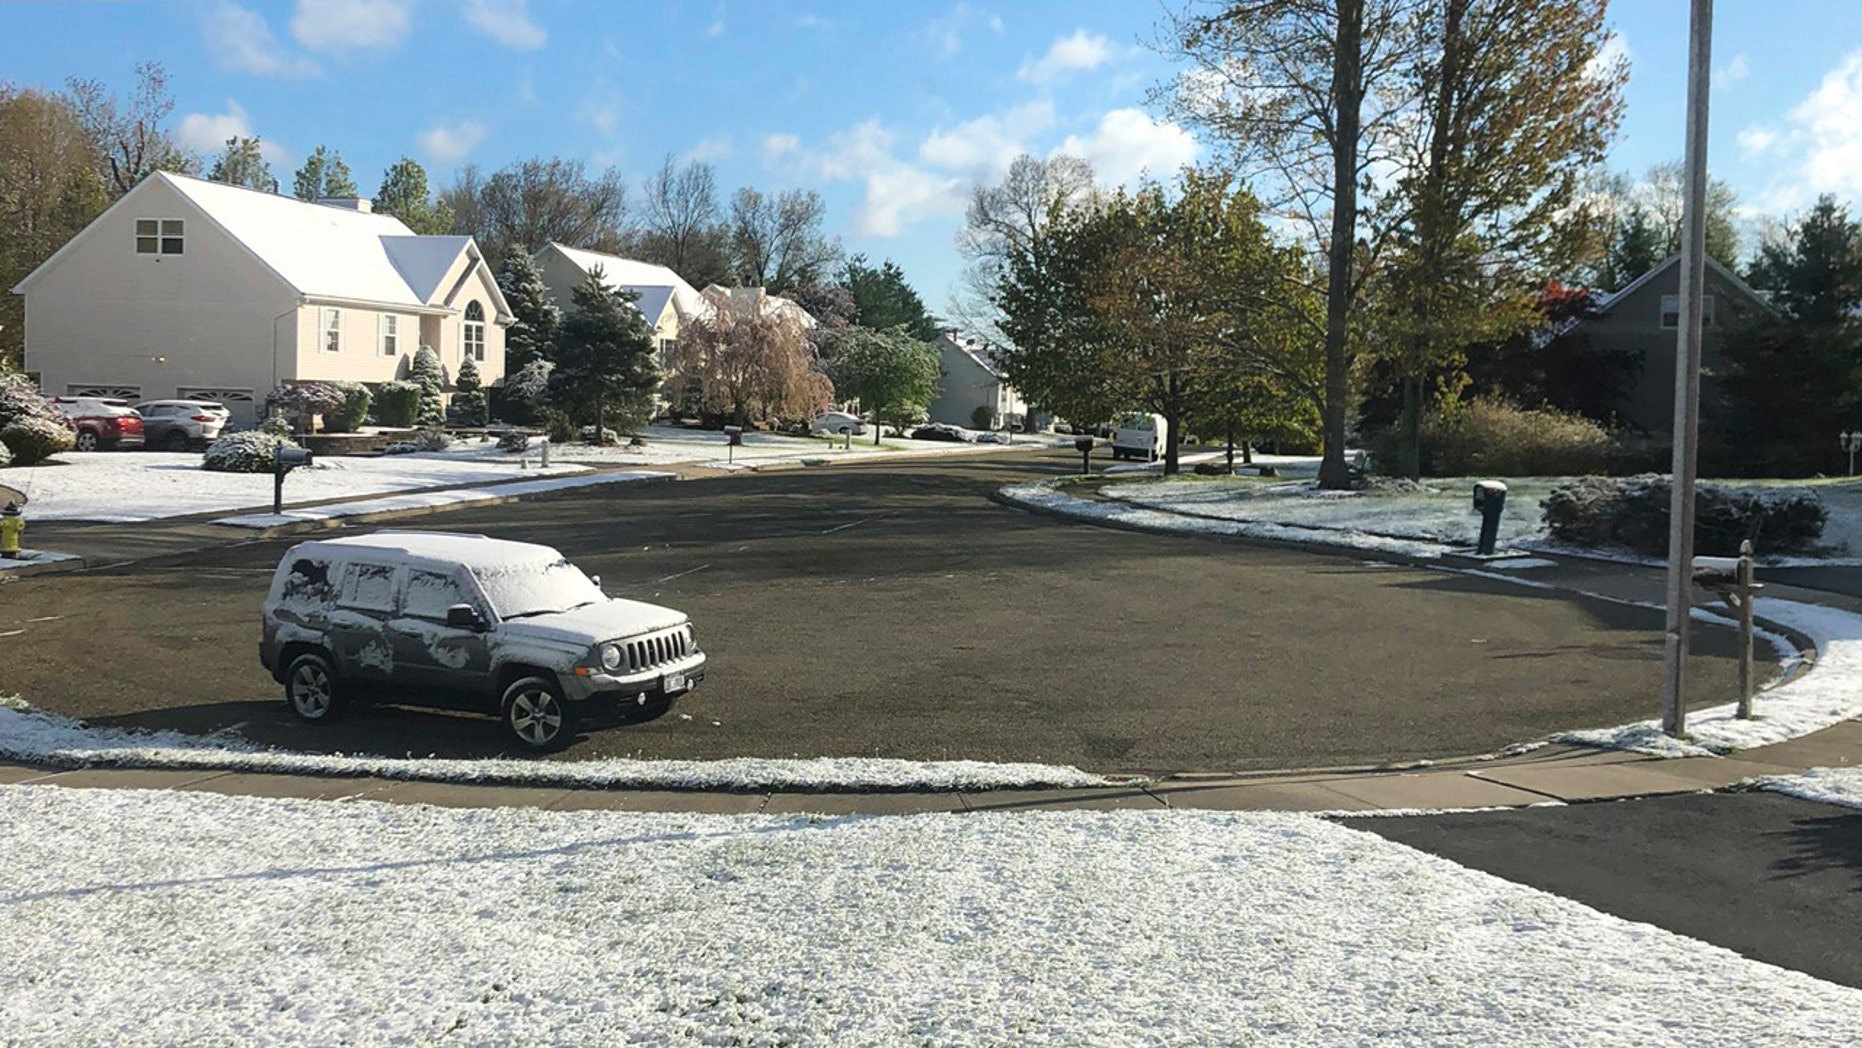 In this photo provided by Robert Beretta, snow accumulates on the grass and vehicles in Monroe, N.Y., Saturday, May 9, 2020.